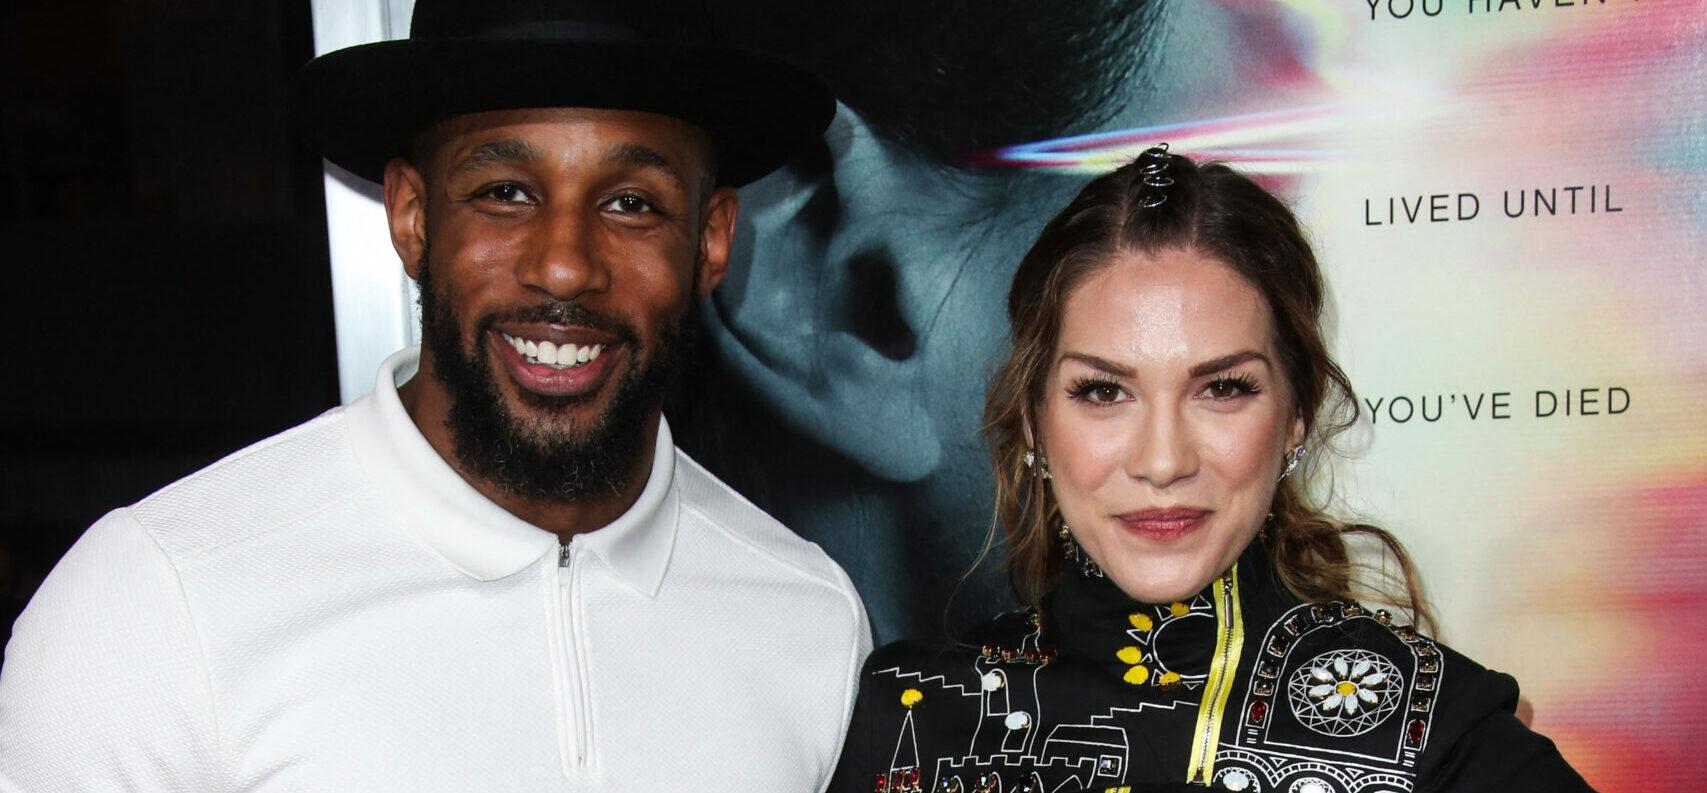 Allison Holker Is Dancing Again! Posts New Dance Videos For The First Time Since Stephen ‘tWitch’ Boss’ Death